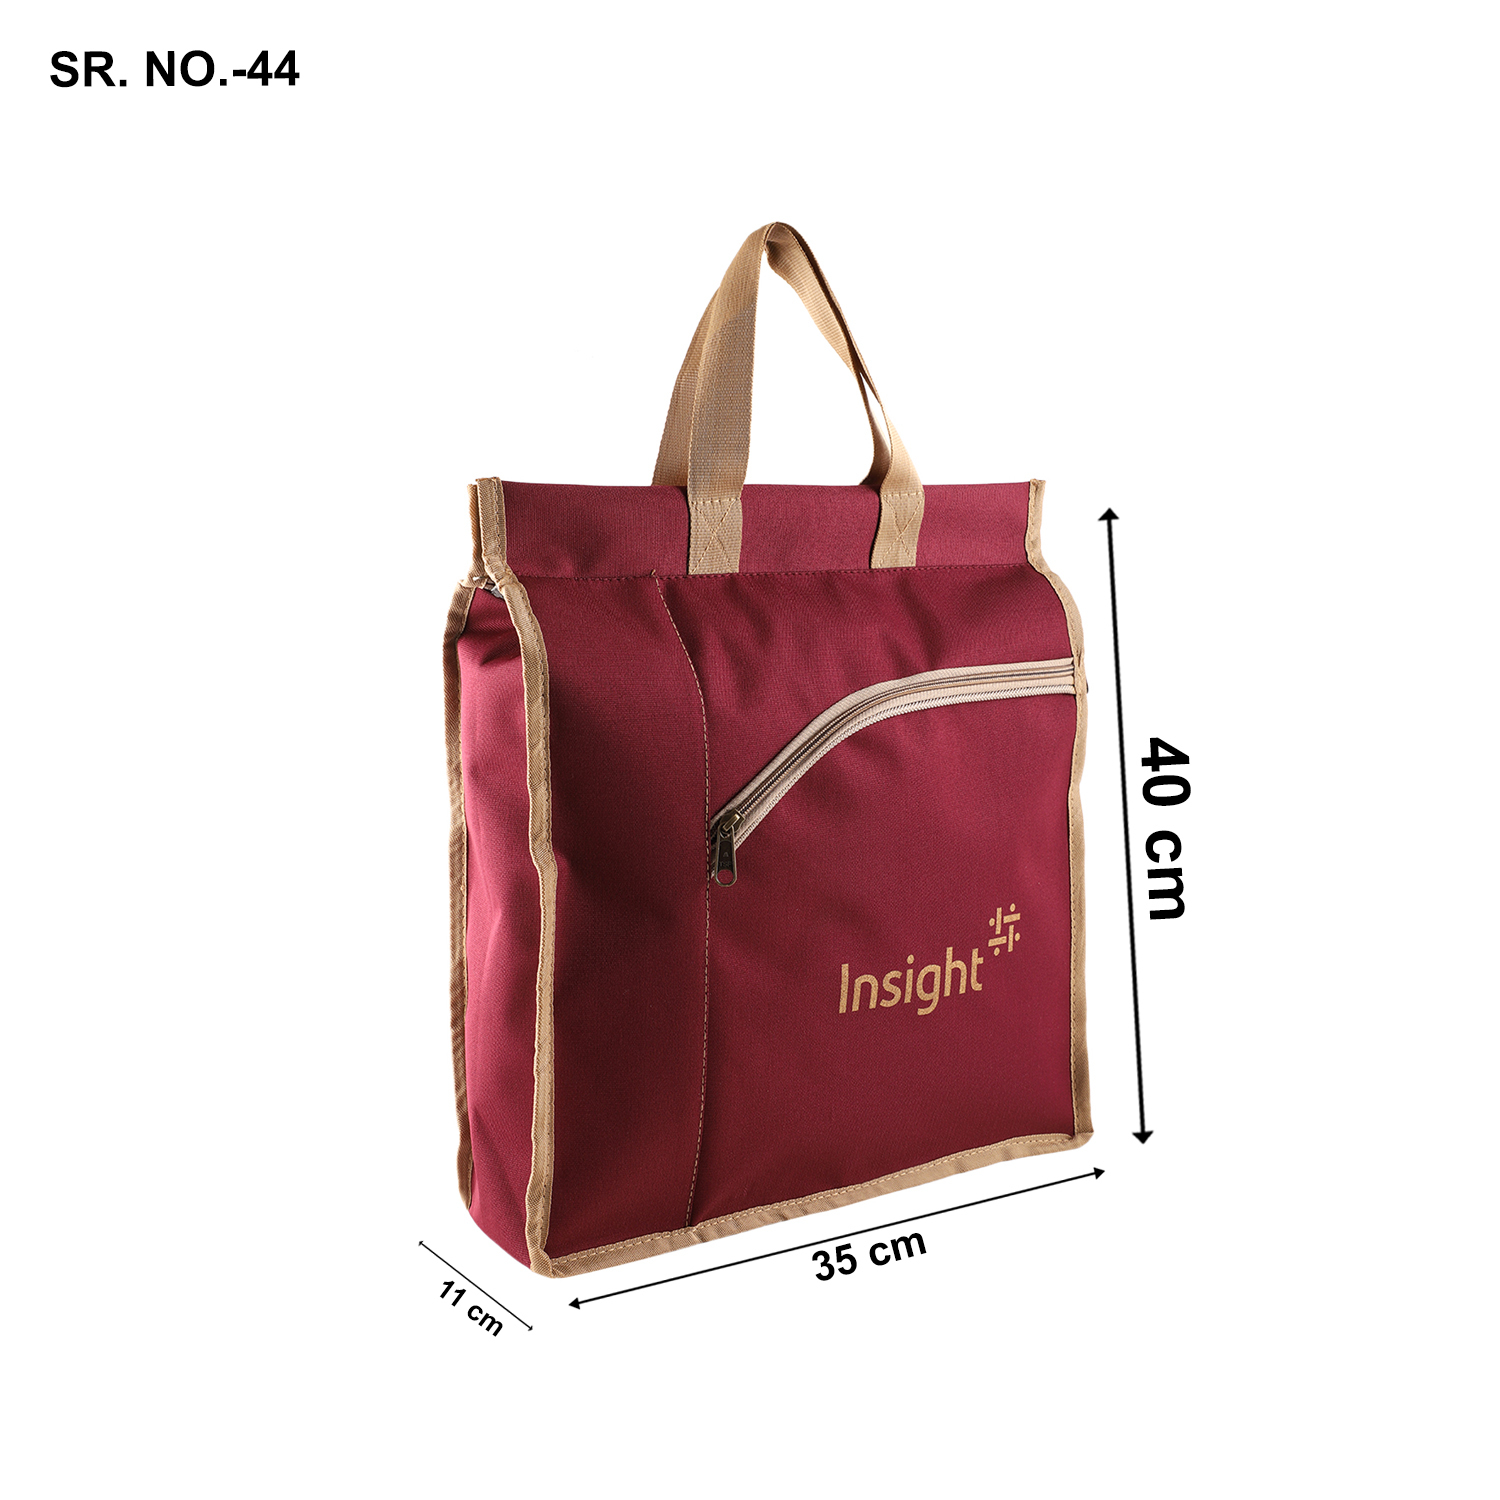 Promotional Shopping Thaila / Carry Bag